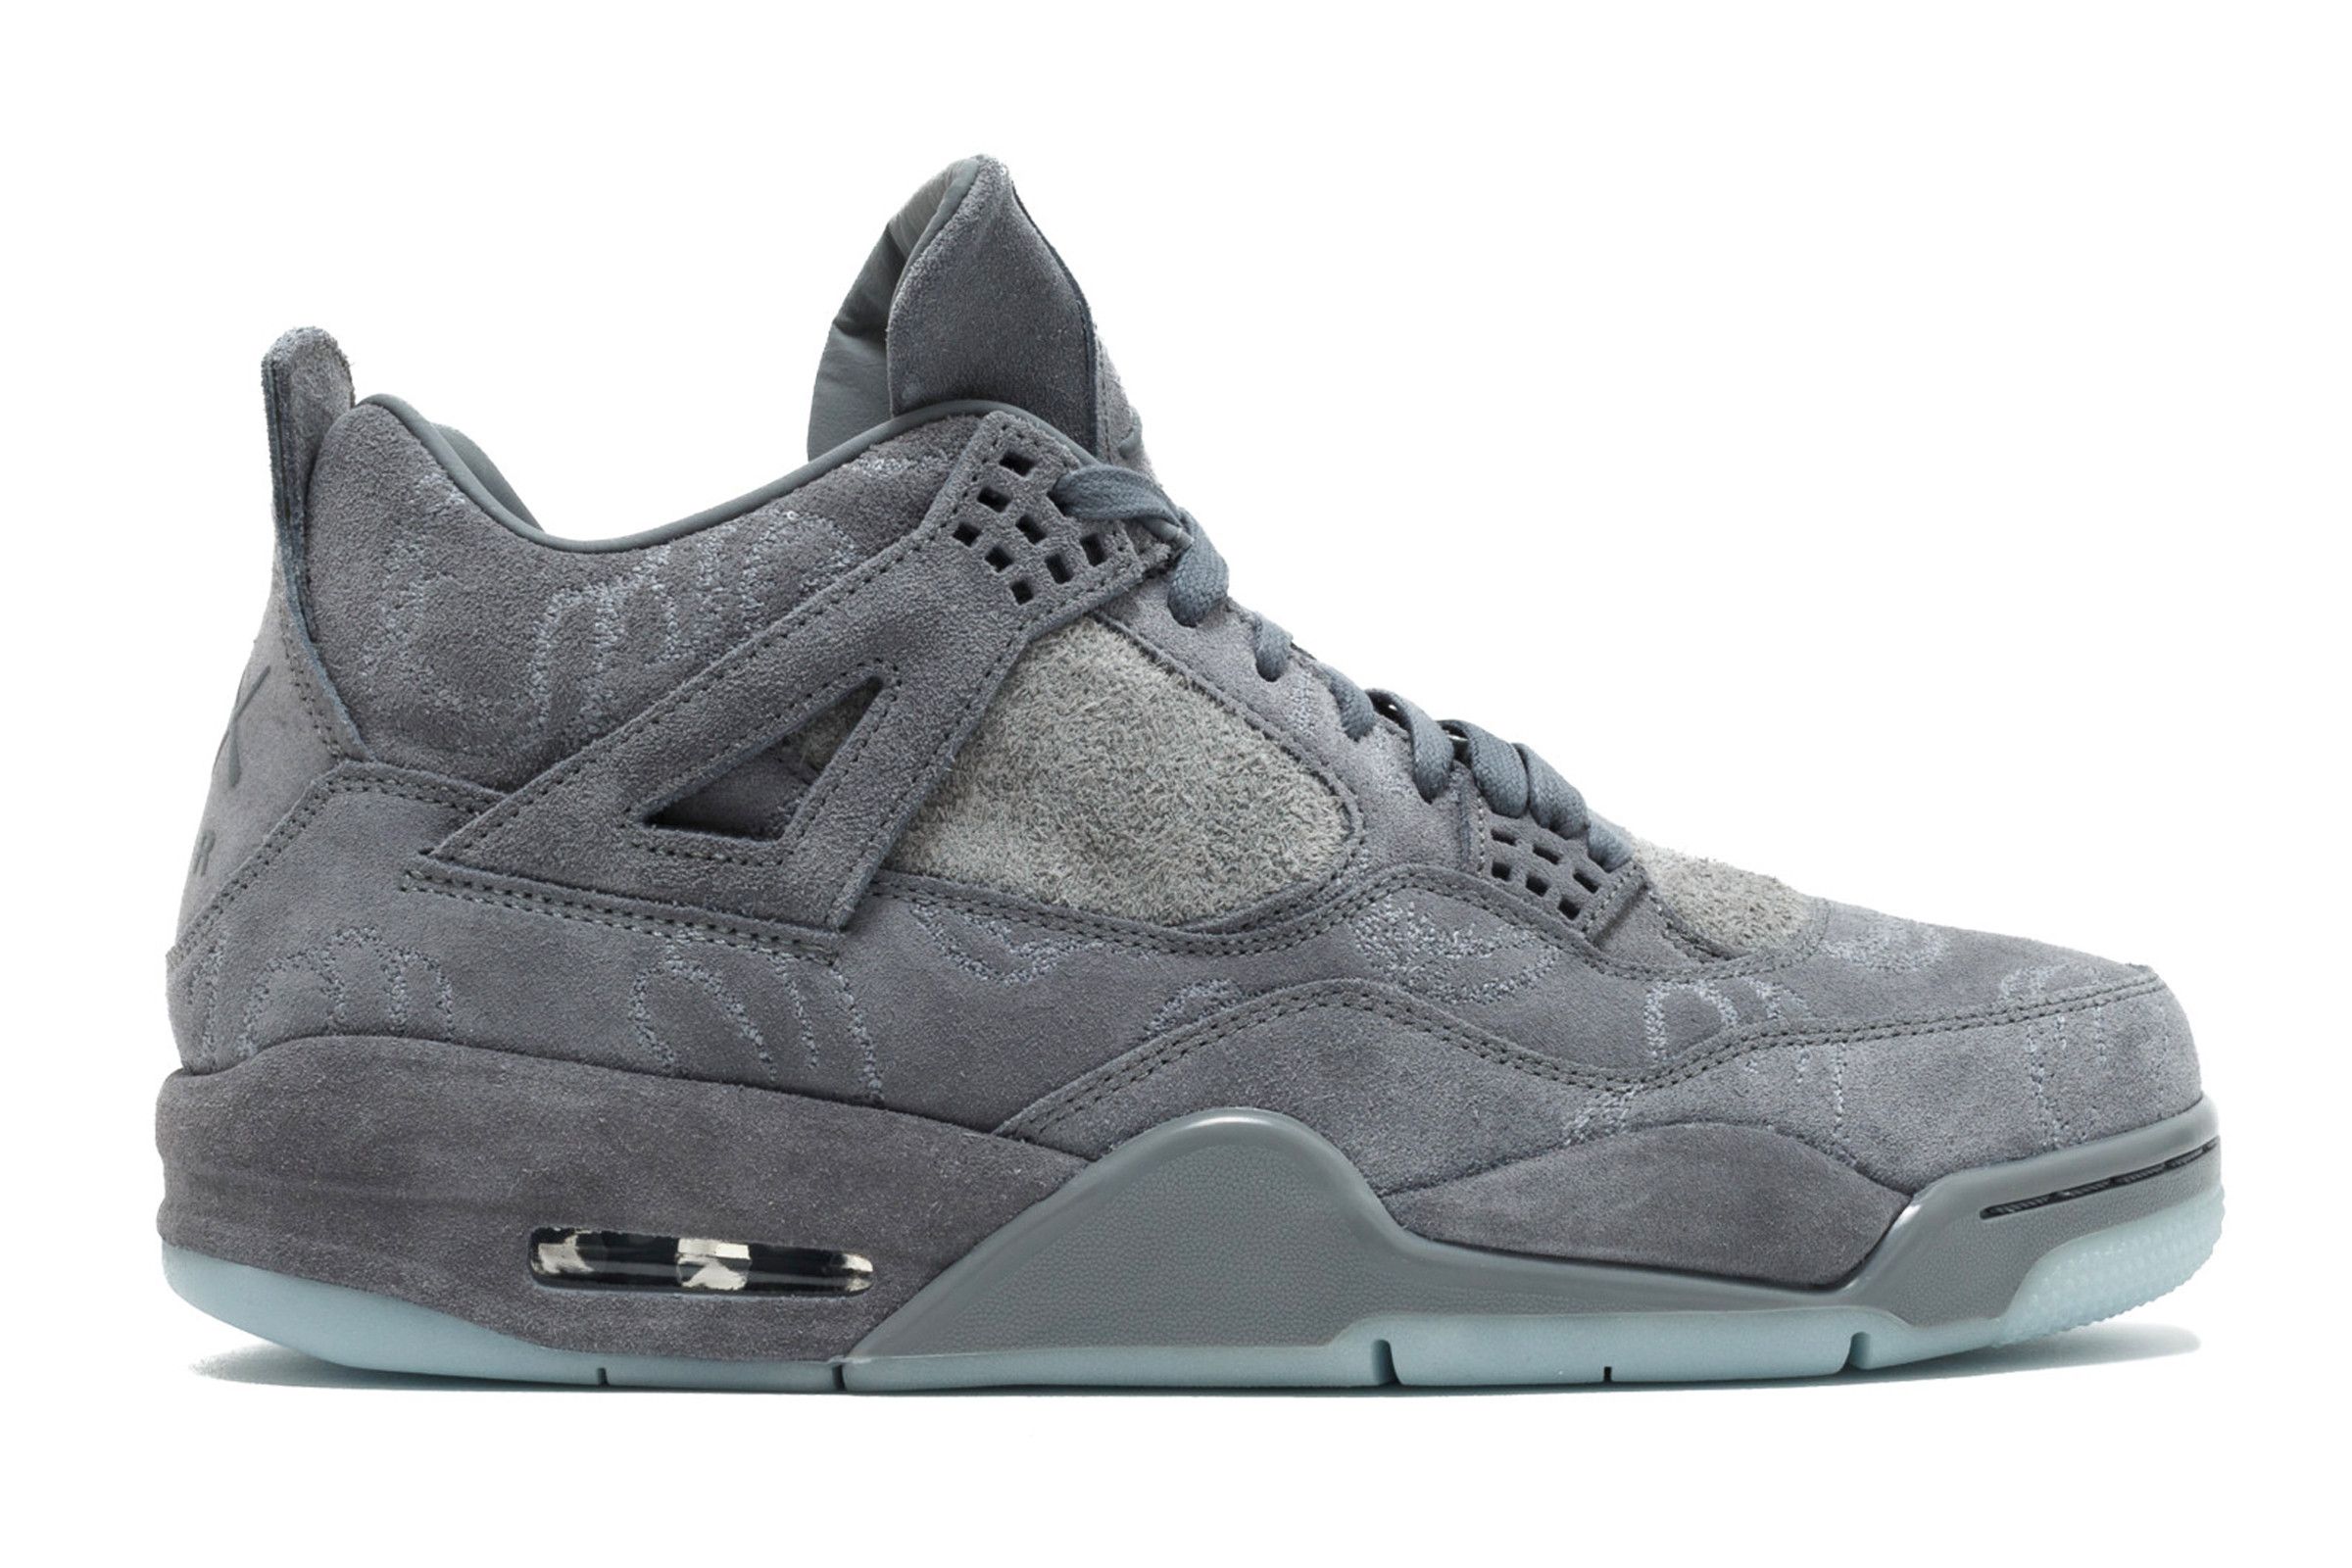 Buggin' Out: Iconic Air Jordan IV Releases